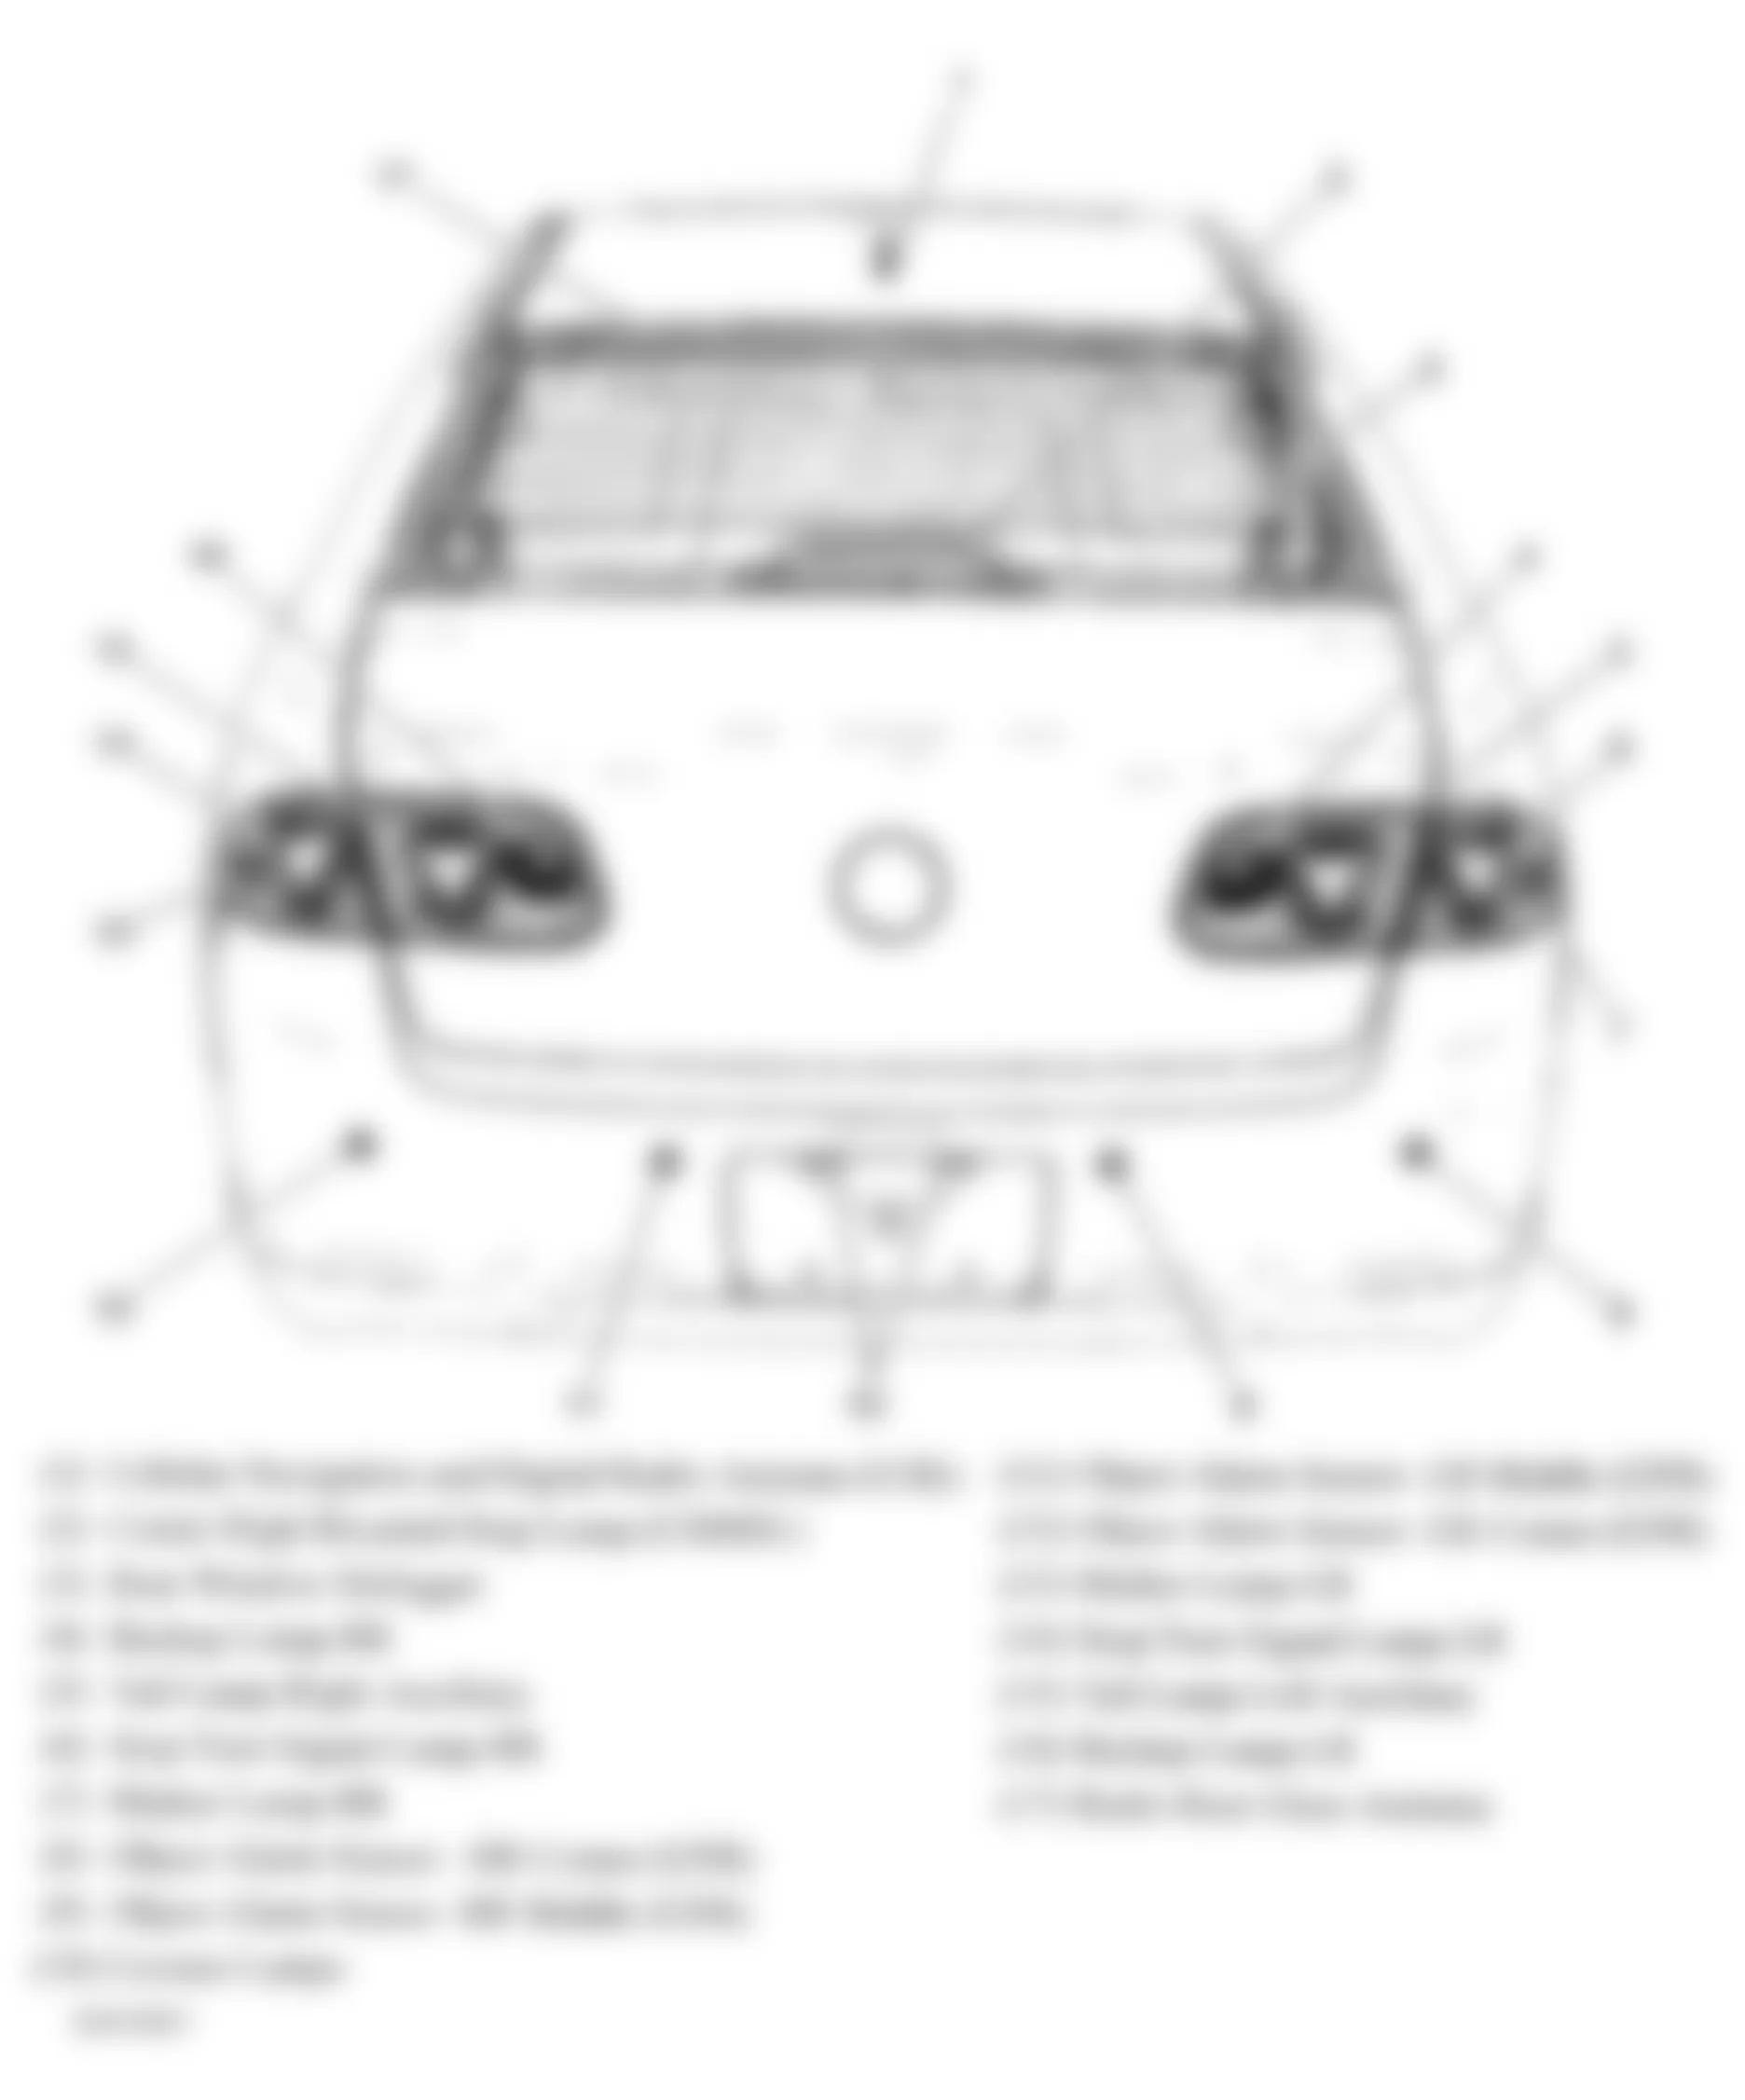 Buick Lucerne Super 2010 - Component Locations -  Rear Of Vehicle